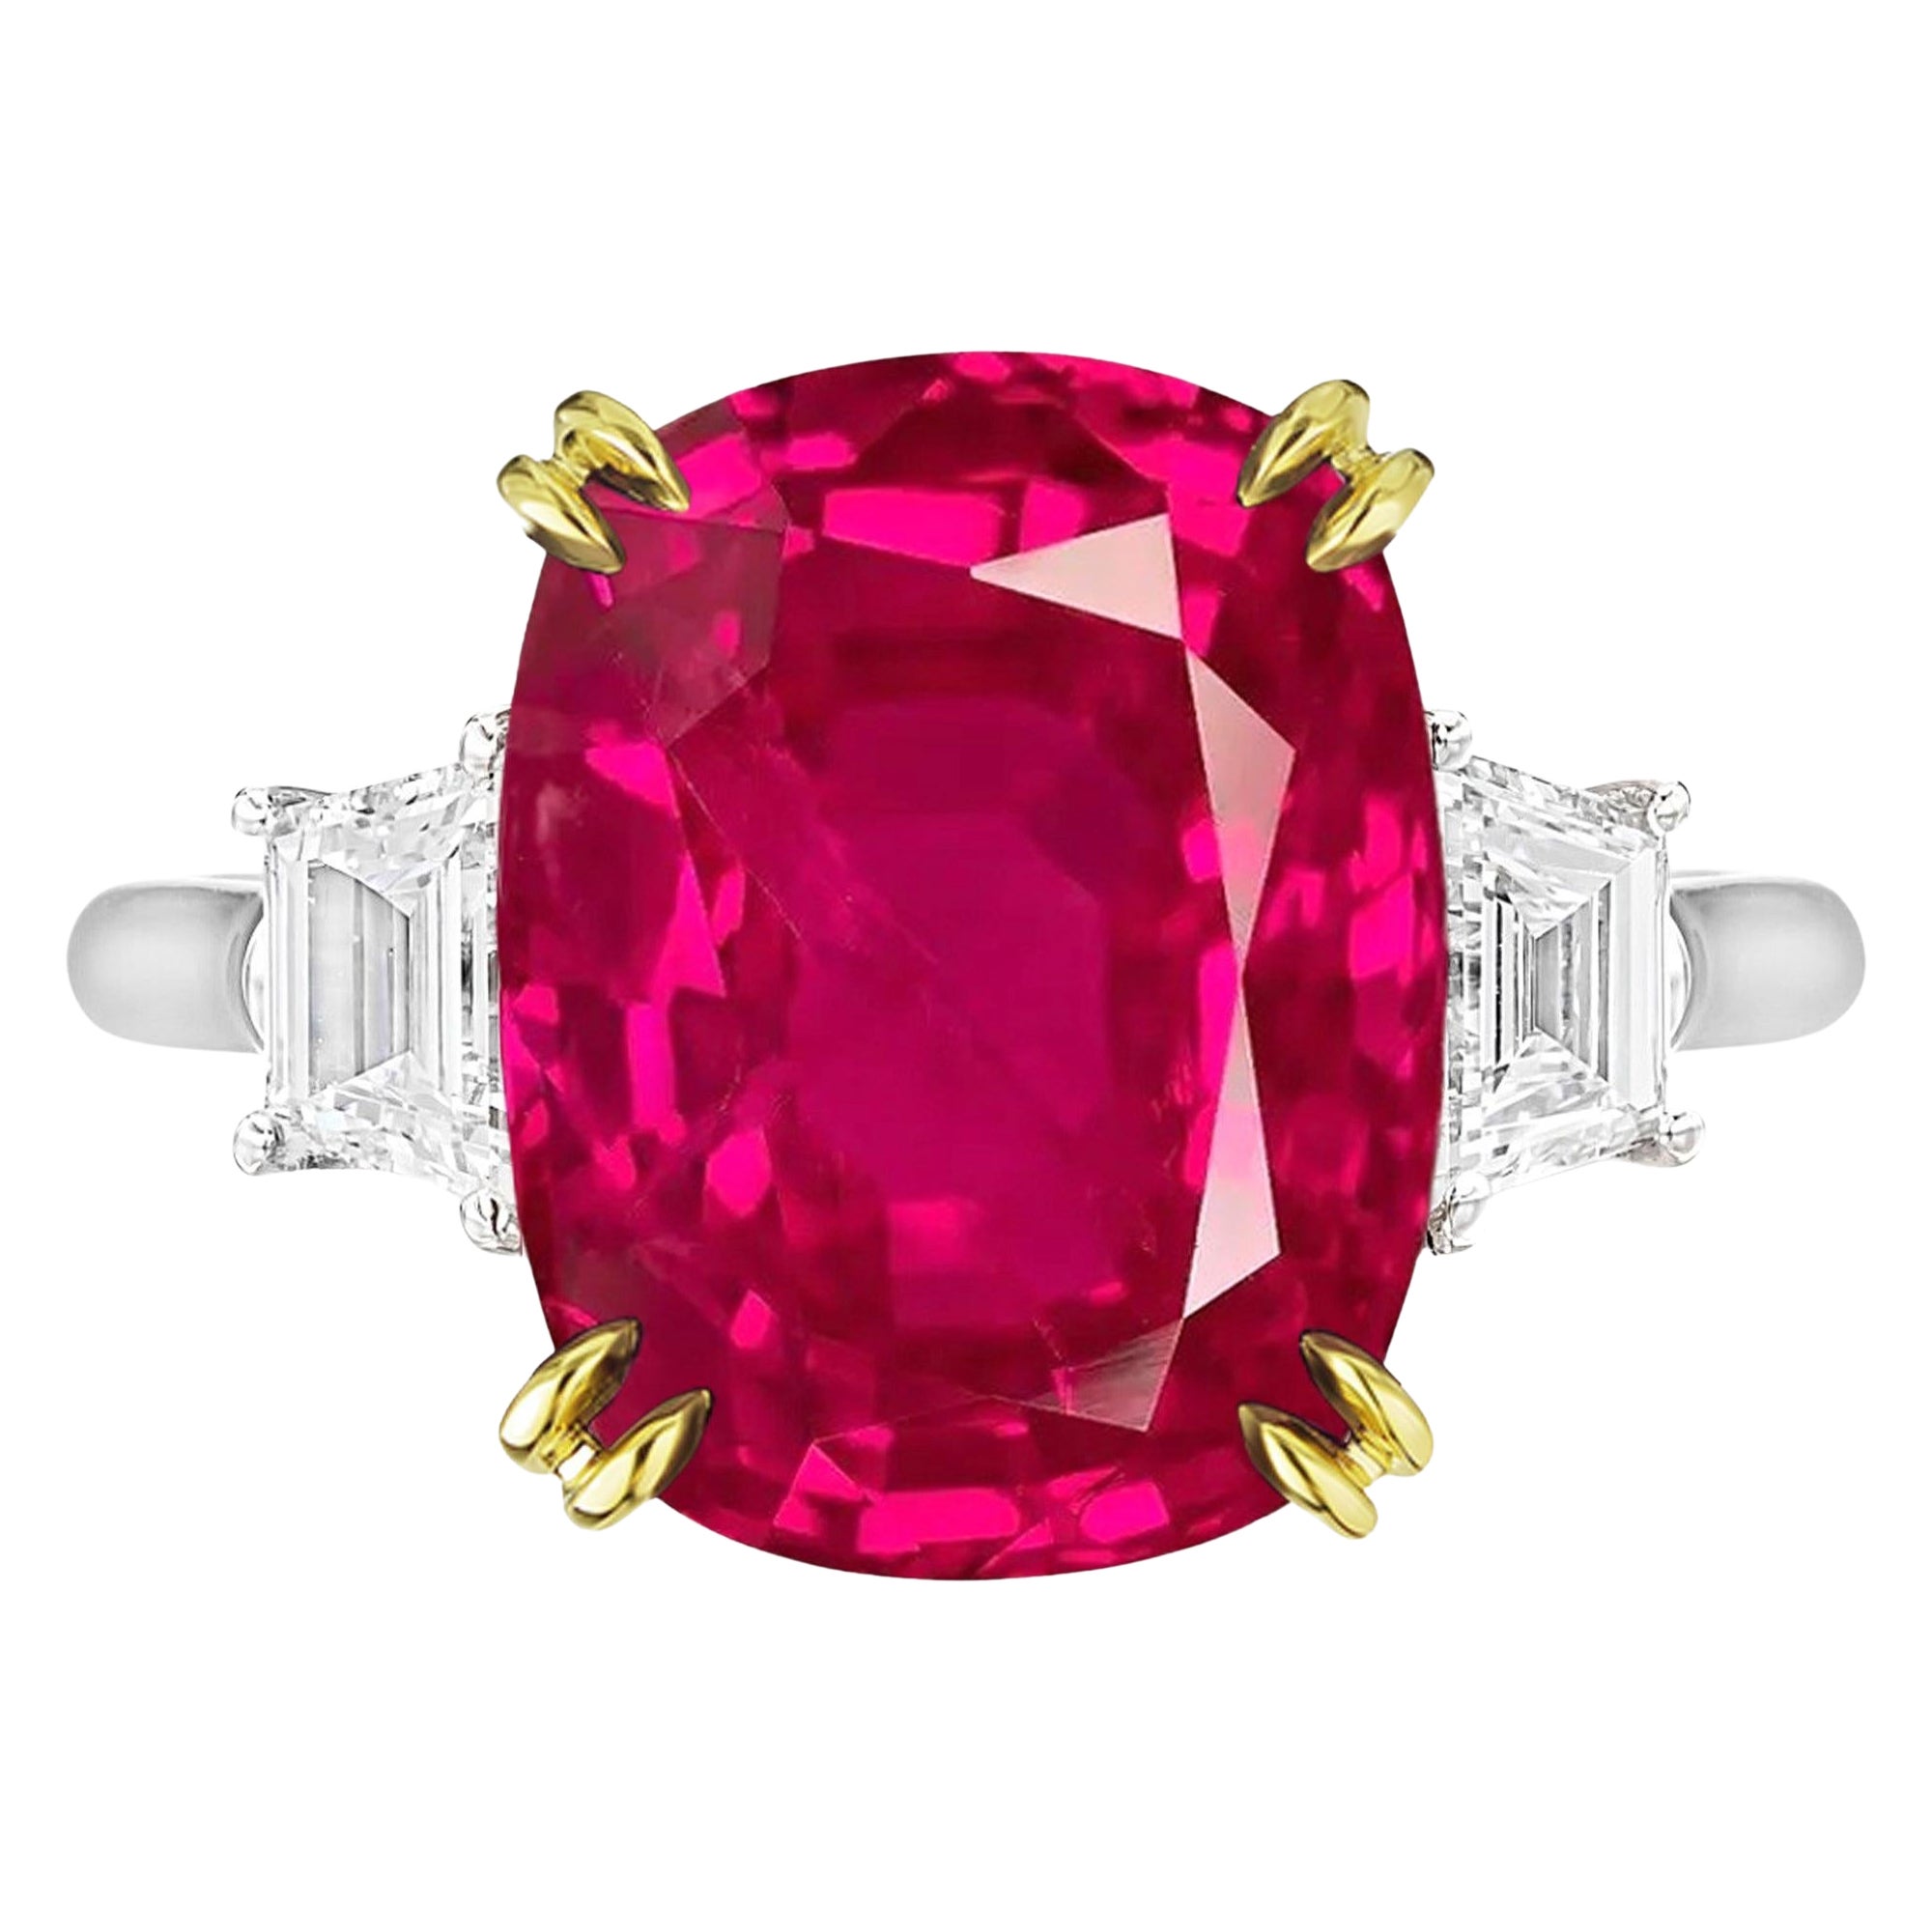 GRS No Heat Certified 5.05 Carat Ruby Cushion Diamond Ring For Sale